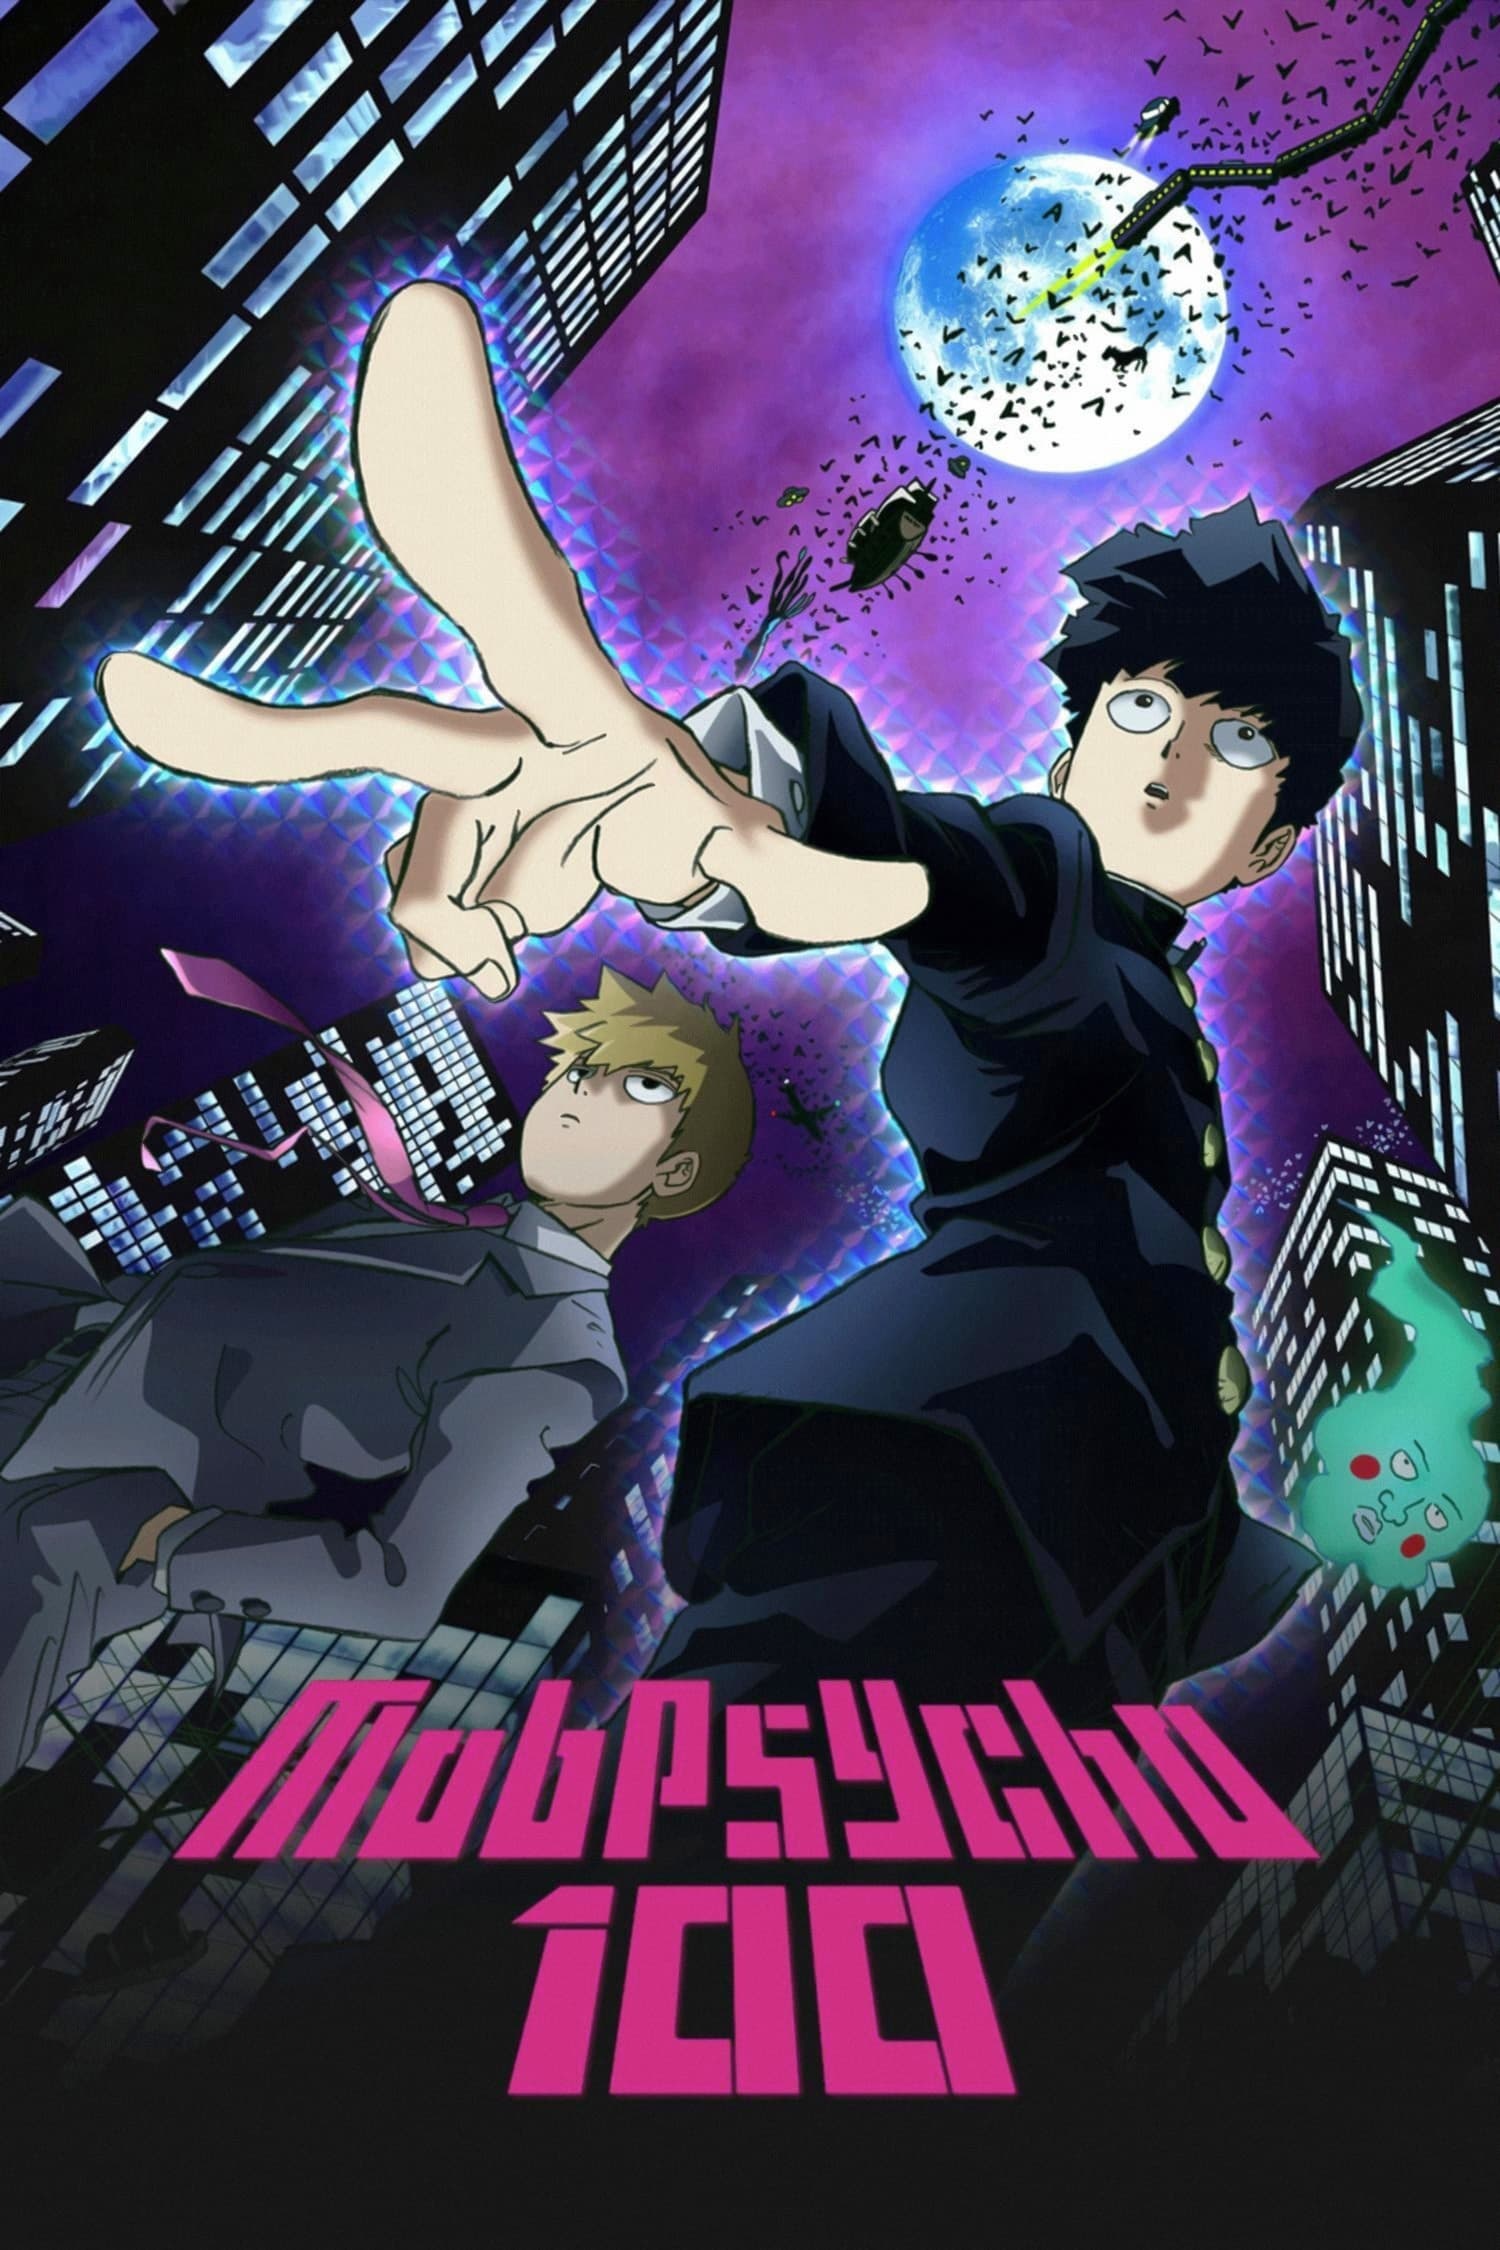 mob-psycho-100-most-inspirational-anime - Pop Culture, Entertainment,  Humor, Travel & More